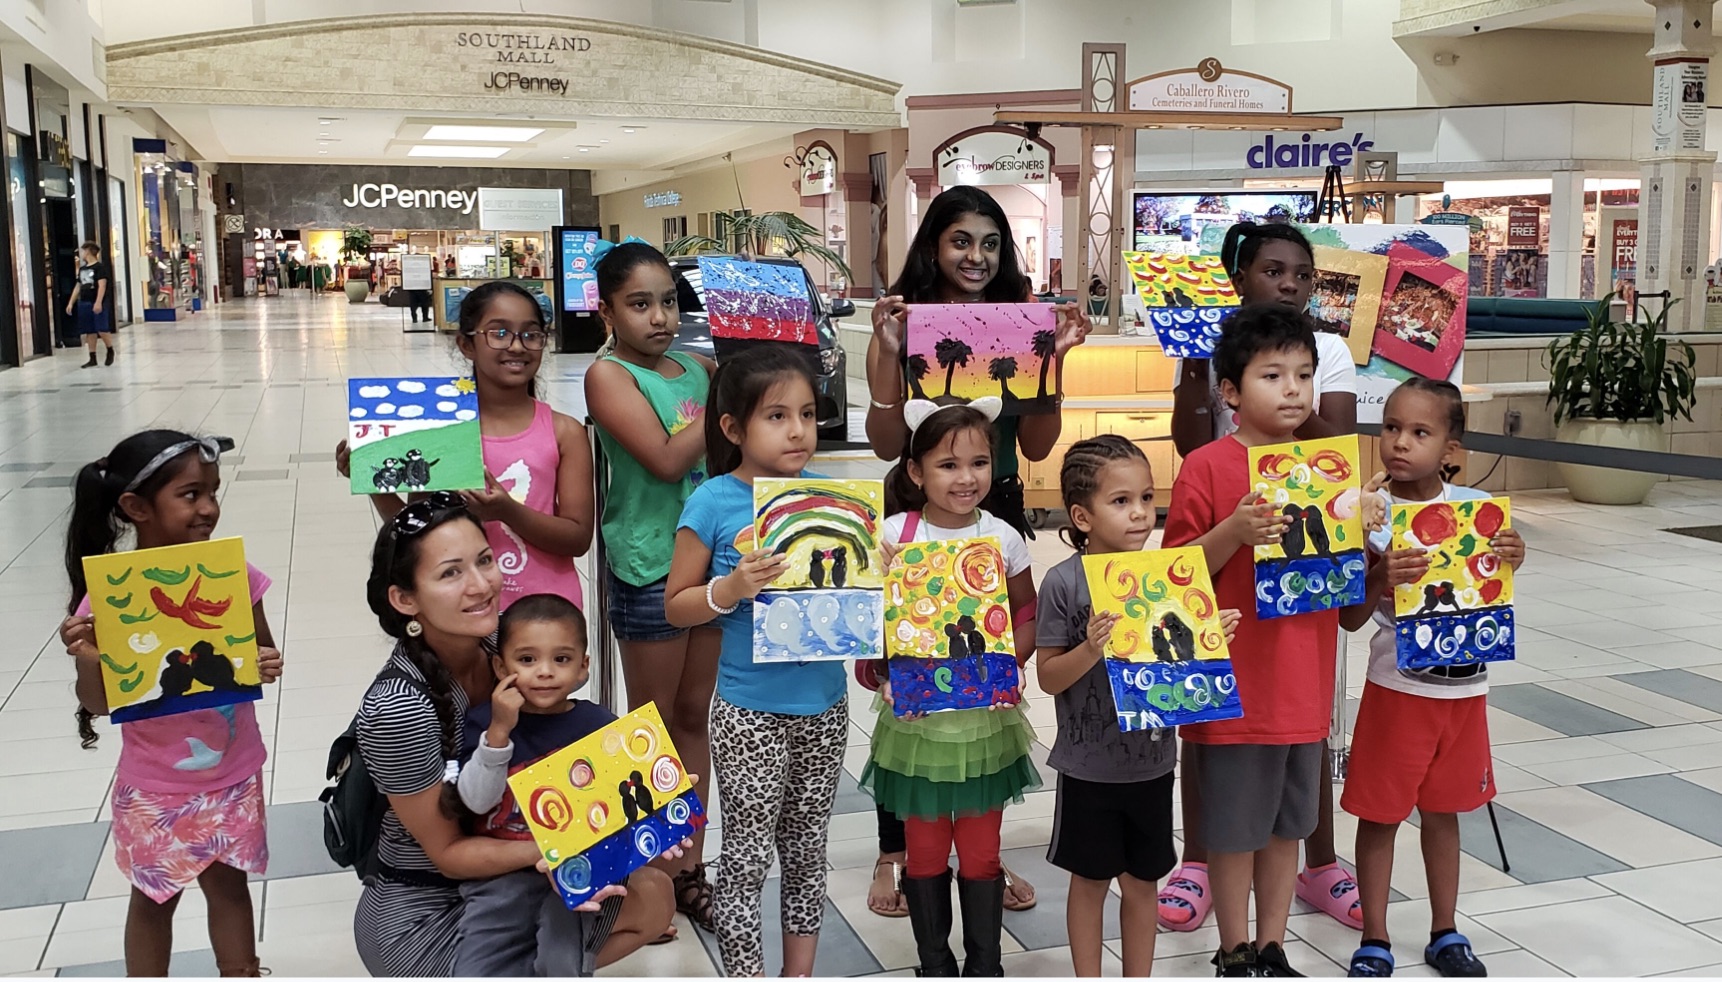 Art & Juice painting workshop at Southland Mall.